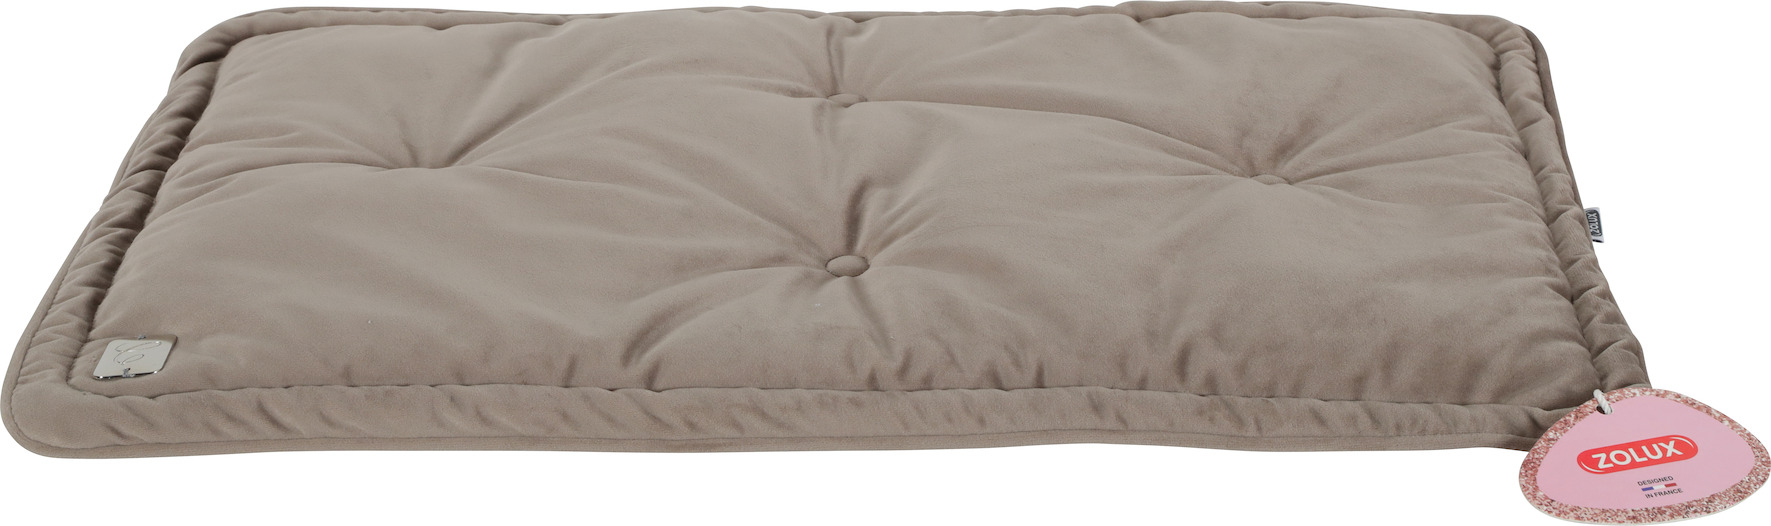 Couette taupe chesterfield Chambord pour chat